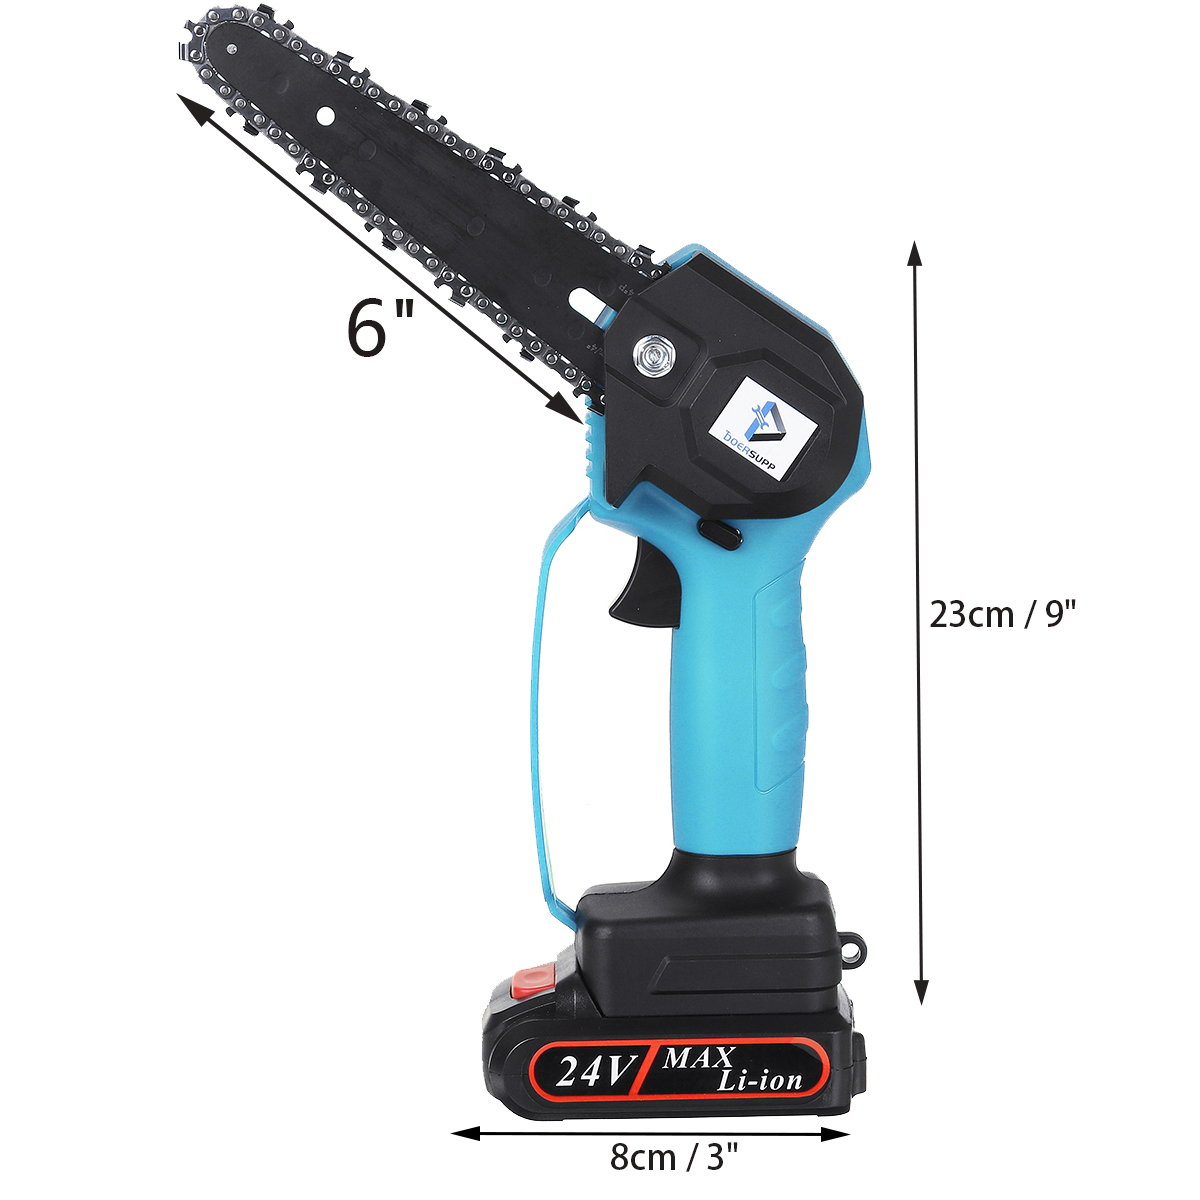 1500W-6Inch-Cordless-Electric-Chain-Saw-Wood-Mini-Cutter-One-Hand-Saw-Woodworking-Tool-W-2pcs-Batter-1833878-12